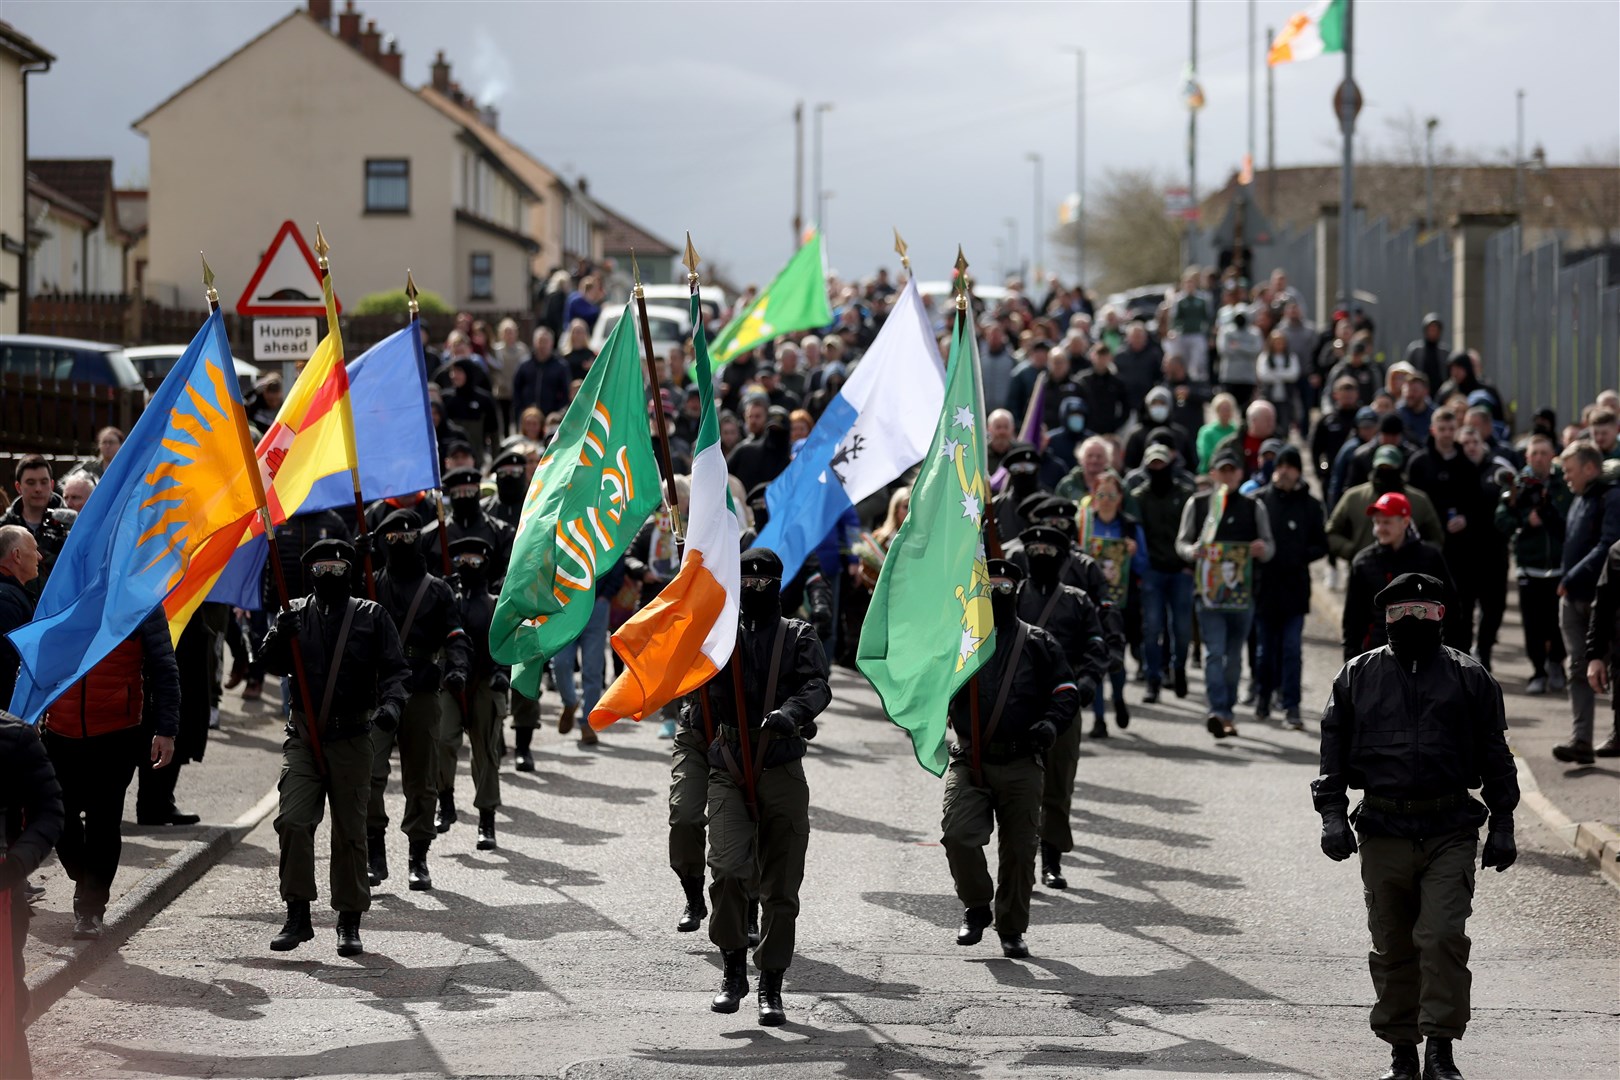 Dissident Republicans parade in the Creggan area of Londonderry on Easter Monday (Liam McBurney/PA)